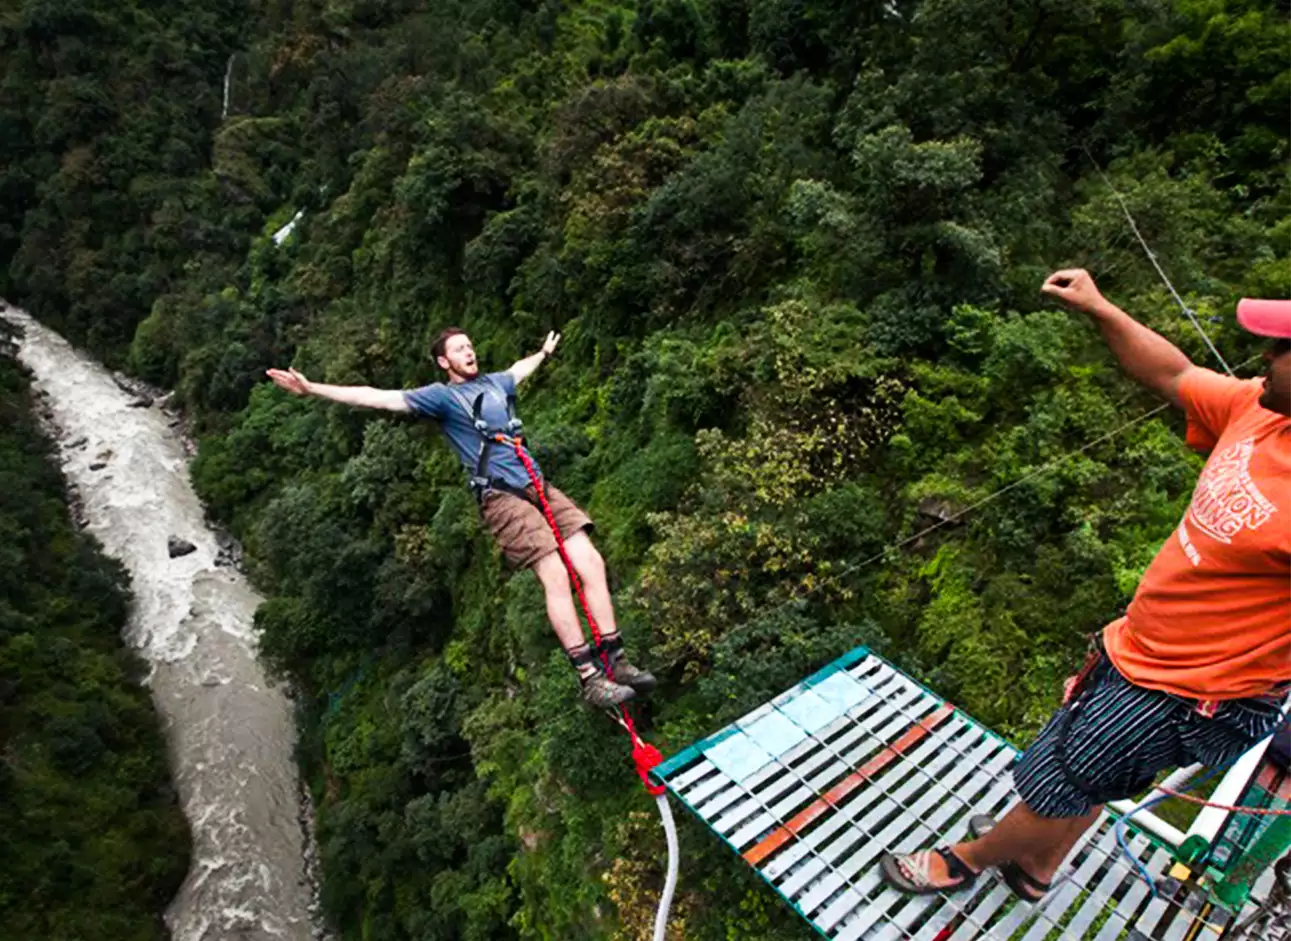 Bungee Jumping - Experience the adrenaline rush with thrilling bungee jumps